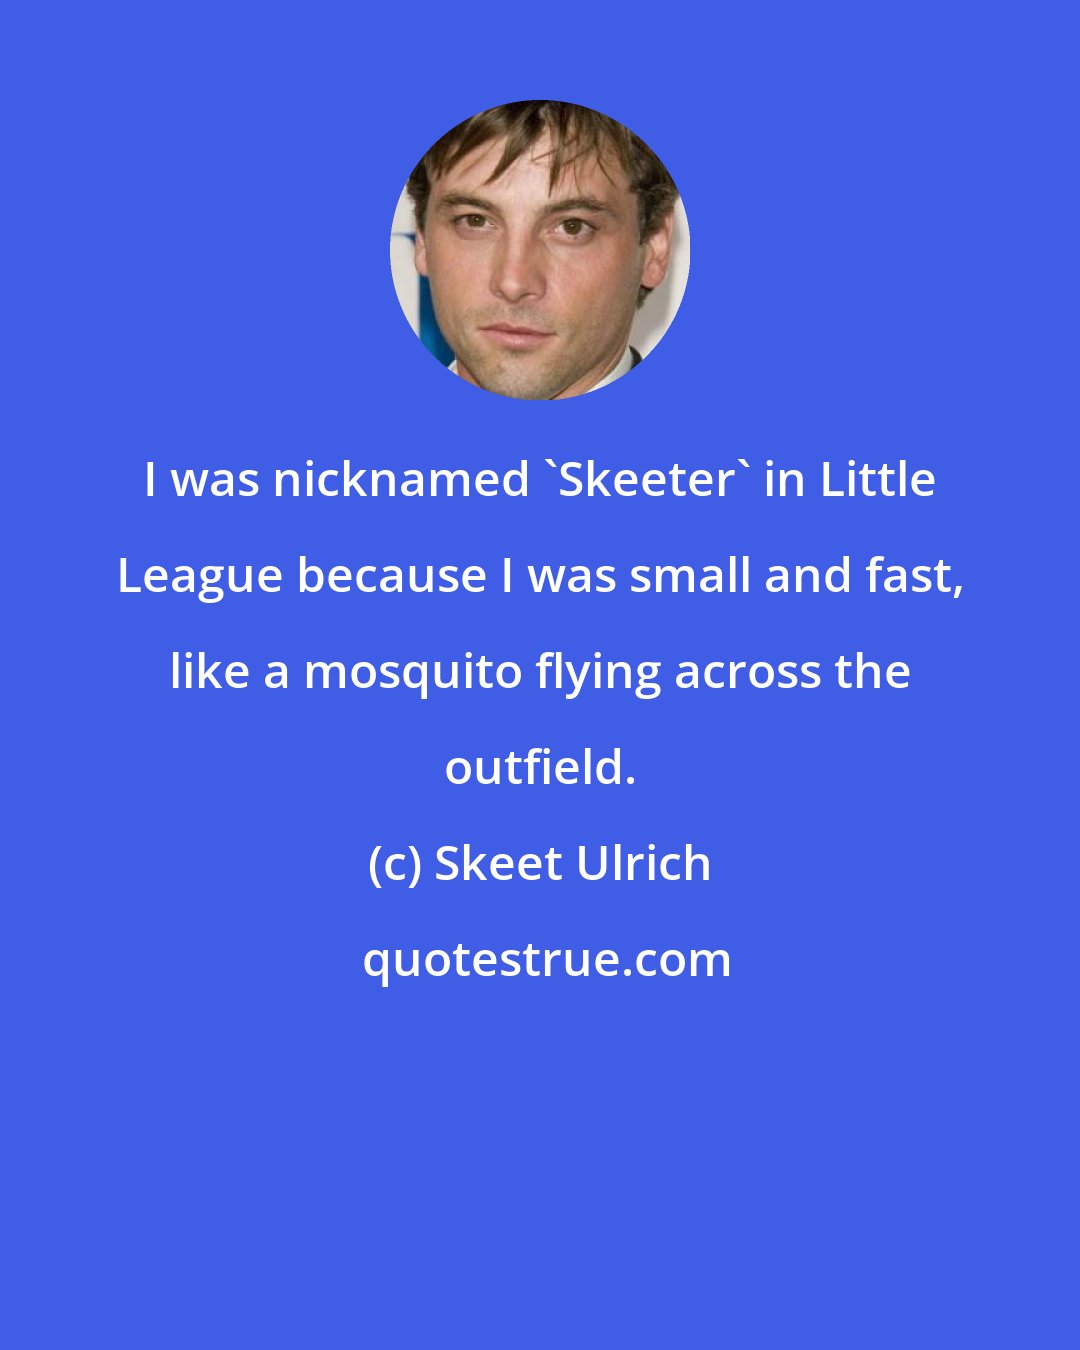 Skeet Ulrich: I was nicknamed 'Skeeter' in Little League because I was small and fast, like a mosquito flying across the outfield.